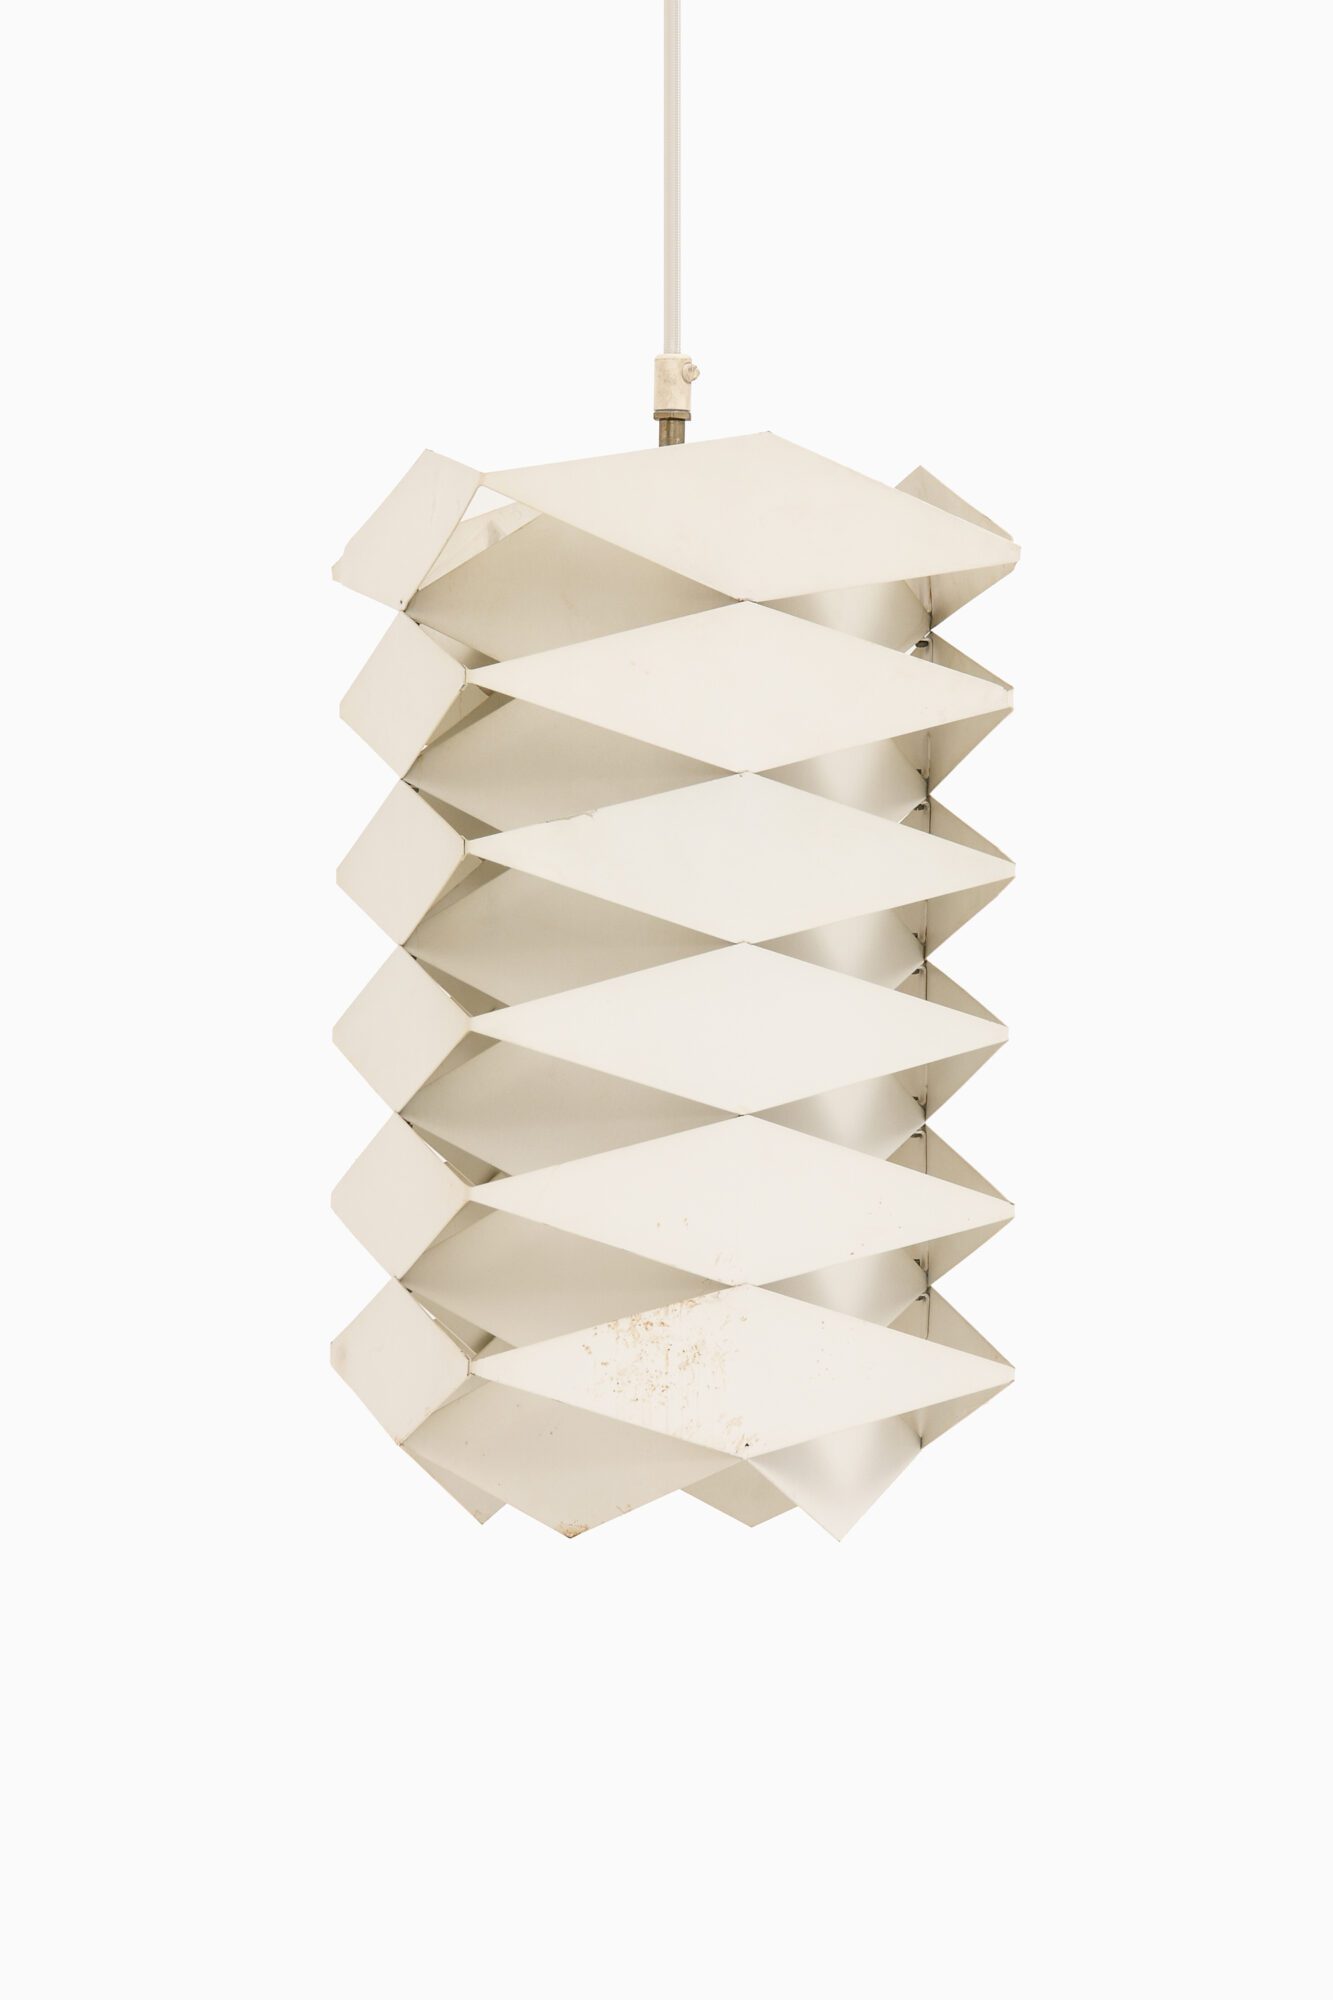 Ceiling lamp in white lacquered metal at Studio Schalling